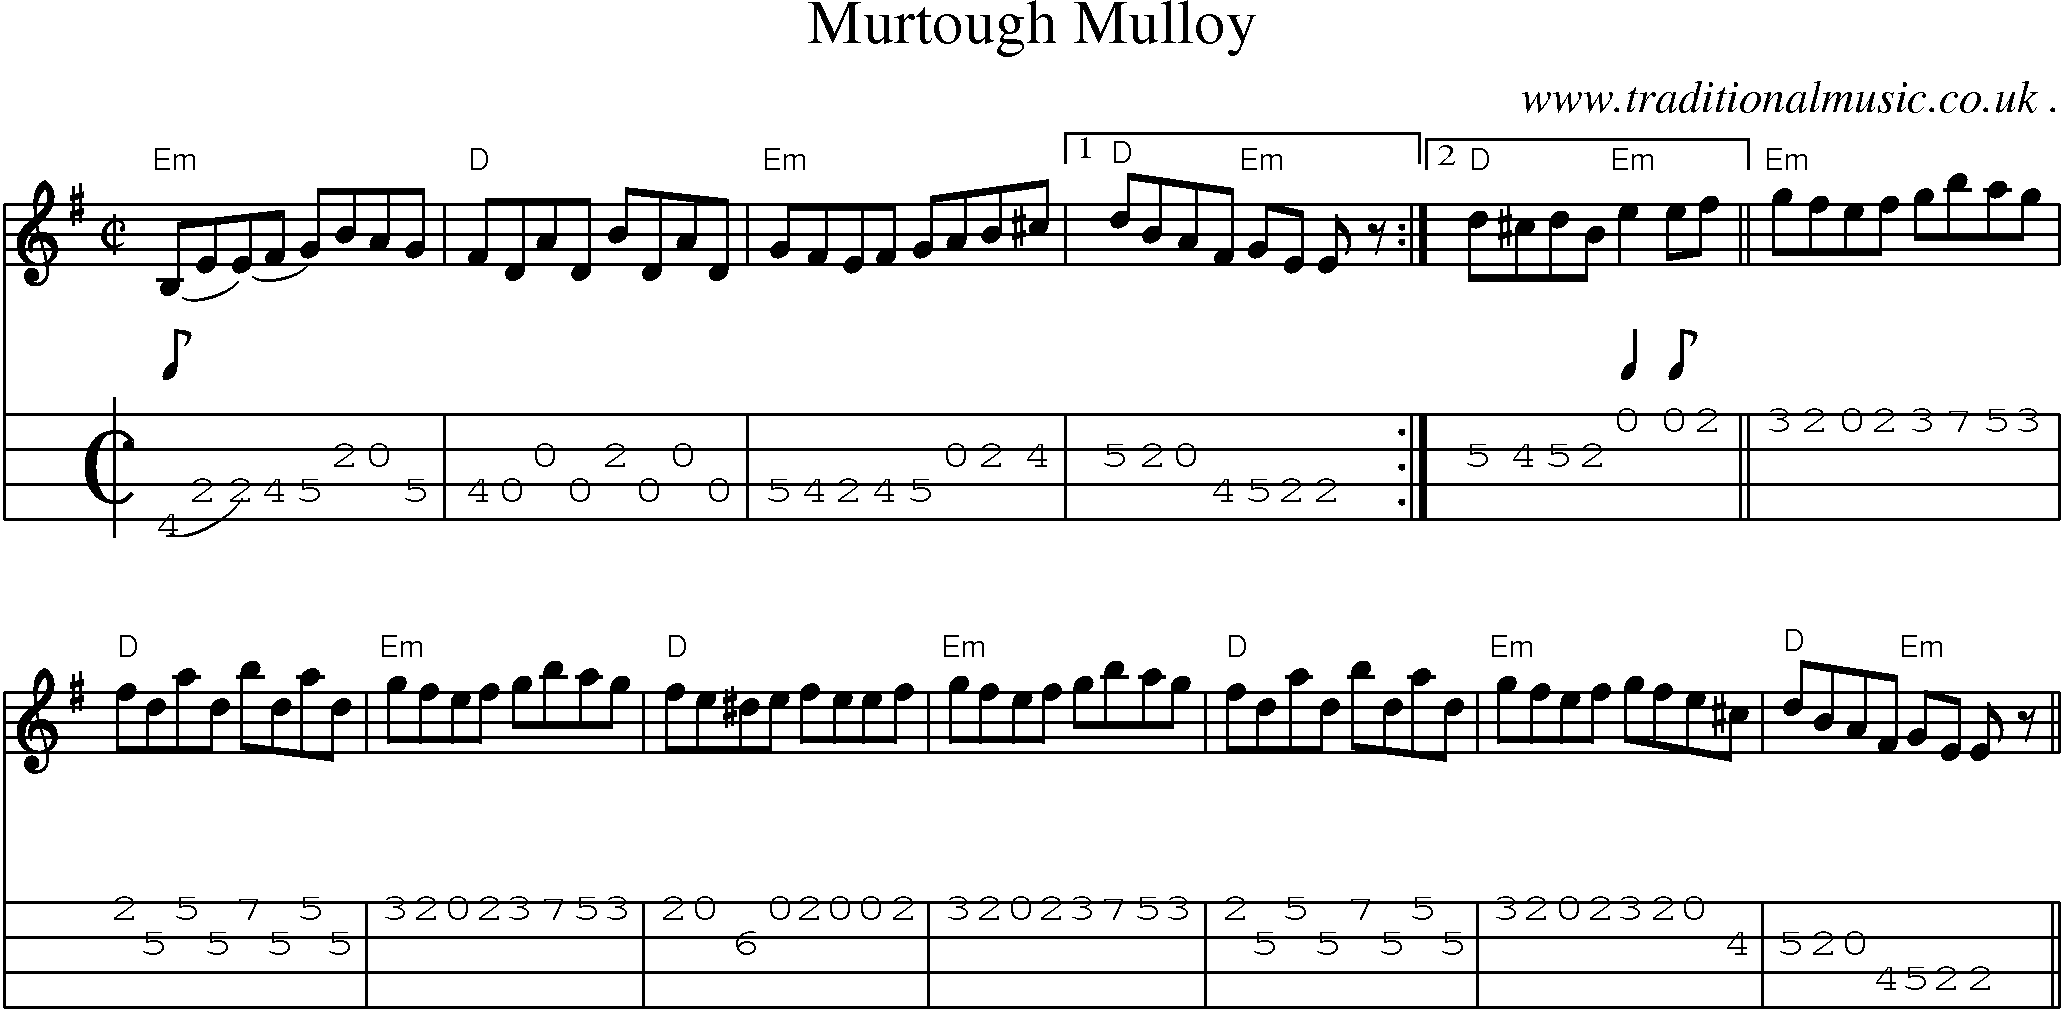 Music Score and Guitar Tabs for Murtough Mulloy